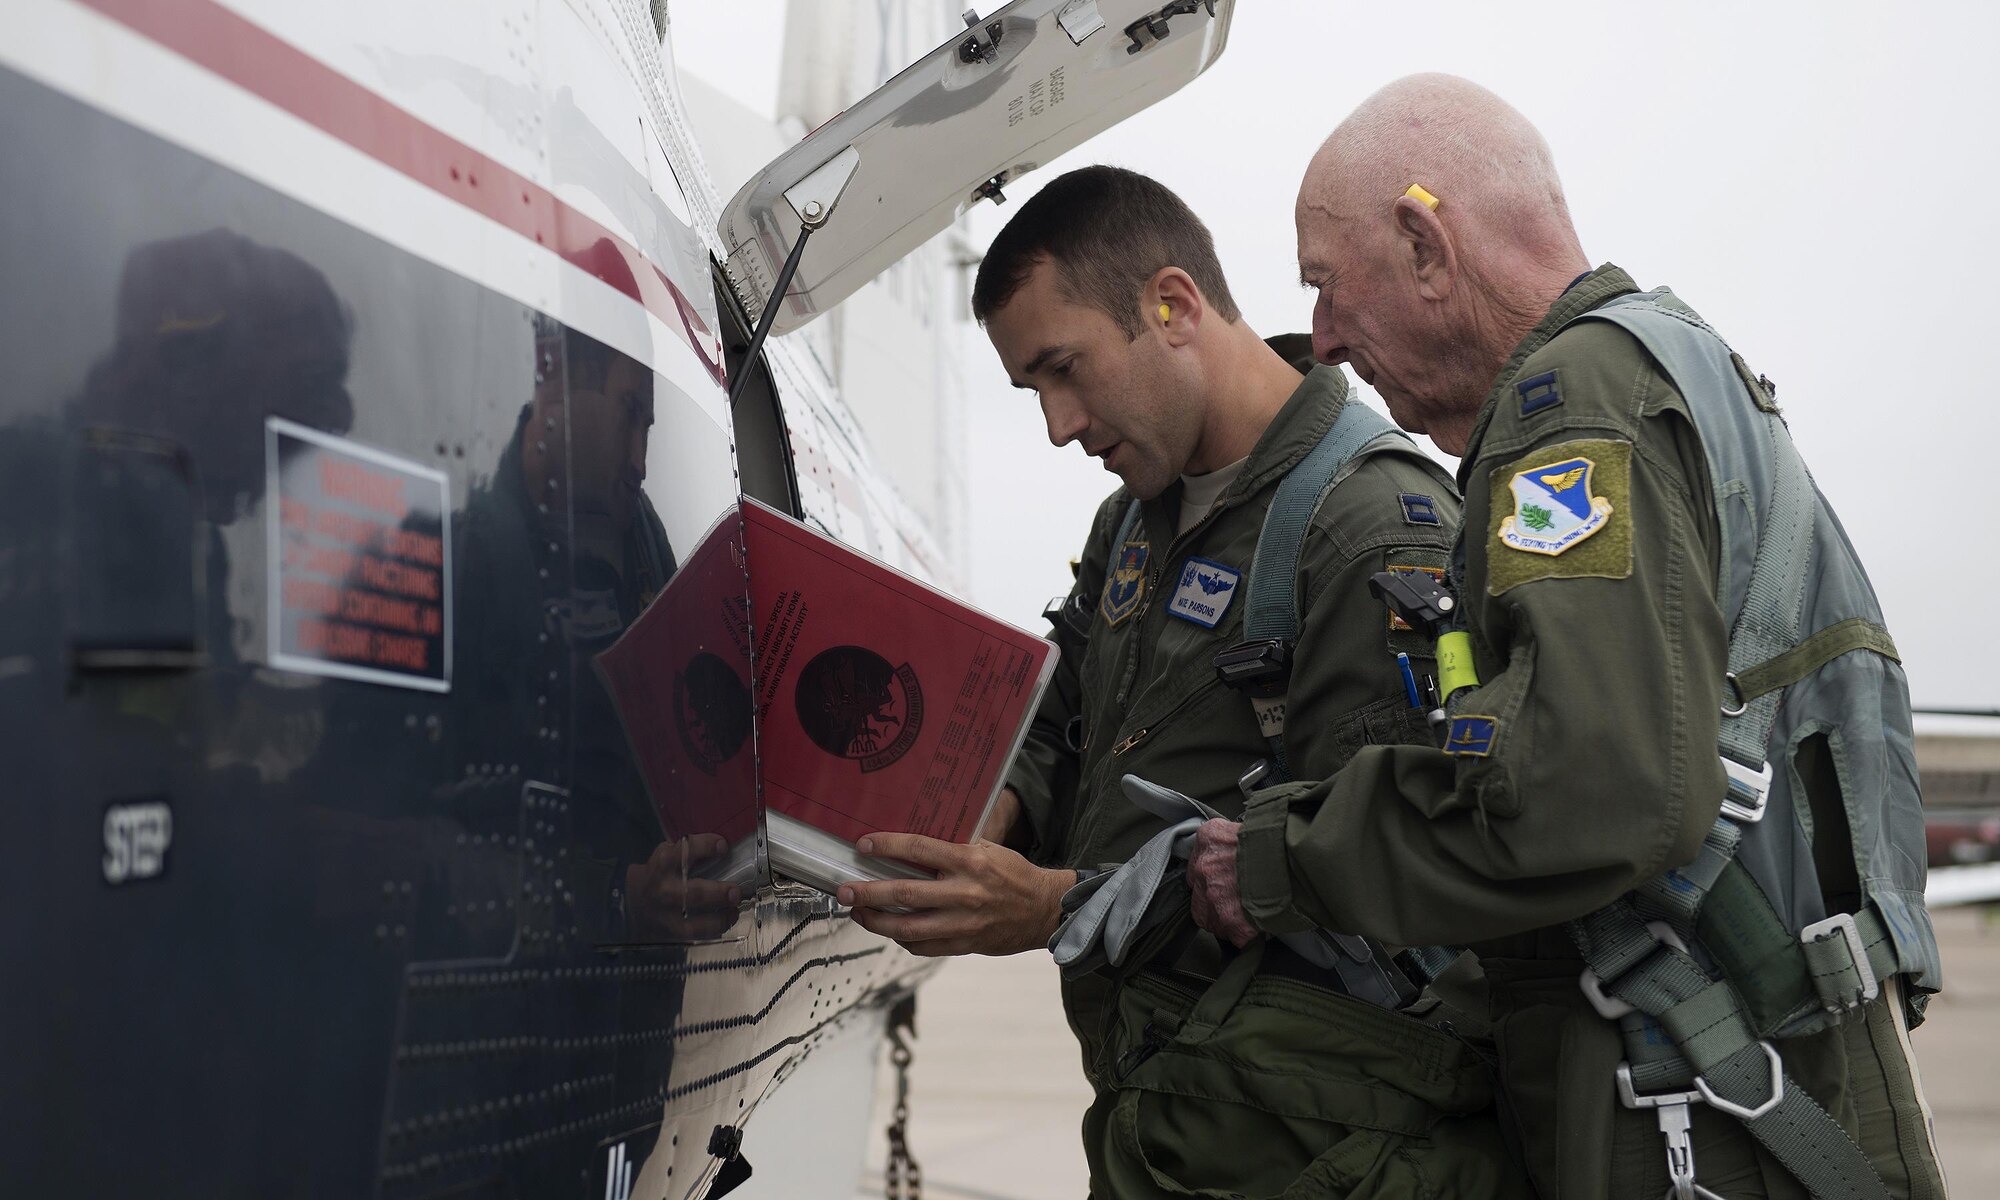 Capt. Steven Parsons, 47th Student Squadron assistant director of operations, and Jerry Yellin, author and retired U.S. Army Air Corps Captain, go over the aircraft forms before their flight in a T-6A Texan II on Laughlin Air Force Base, Texas, Dec. 15, 2016. The aircraft forms include all maintenance performed on the aircraft. (U.S. Air Force photo/Senior Airman Ariel D. Partlow)